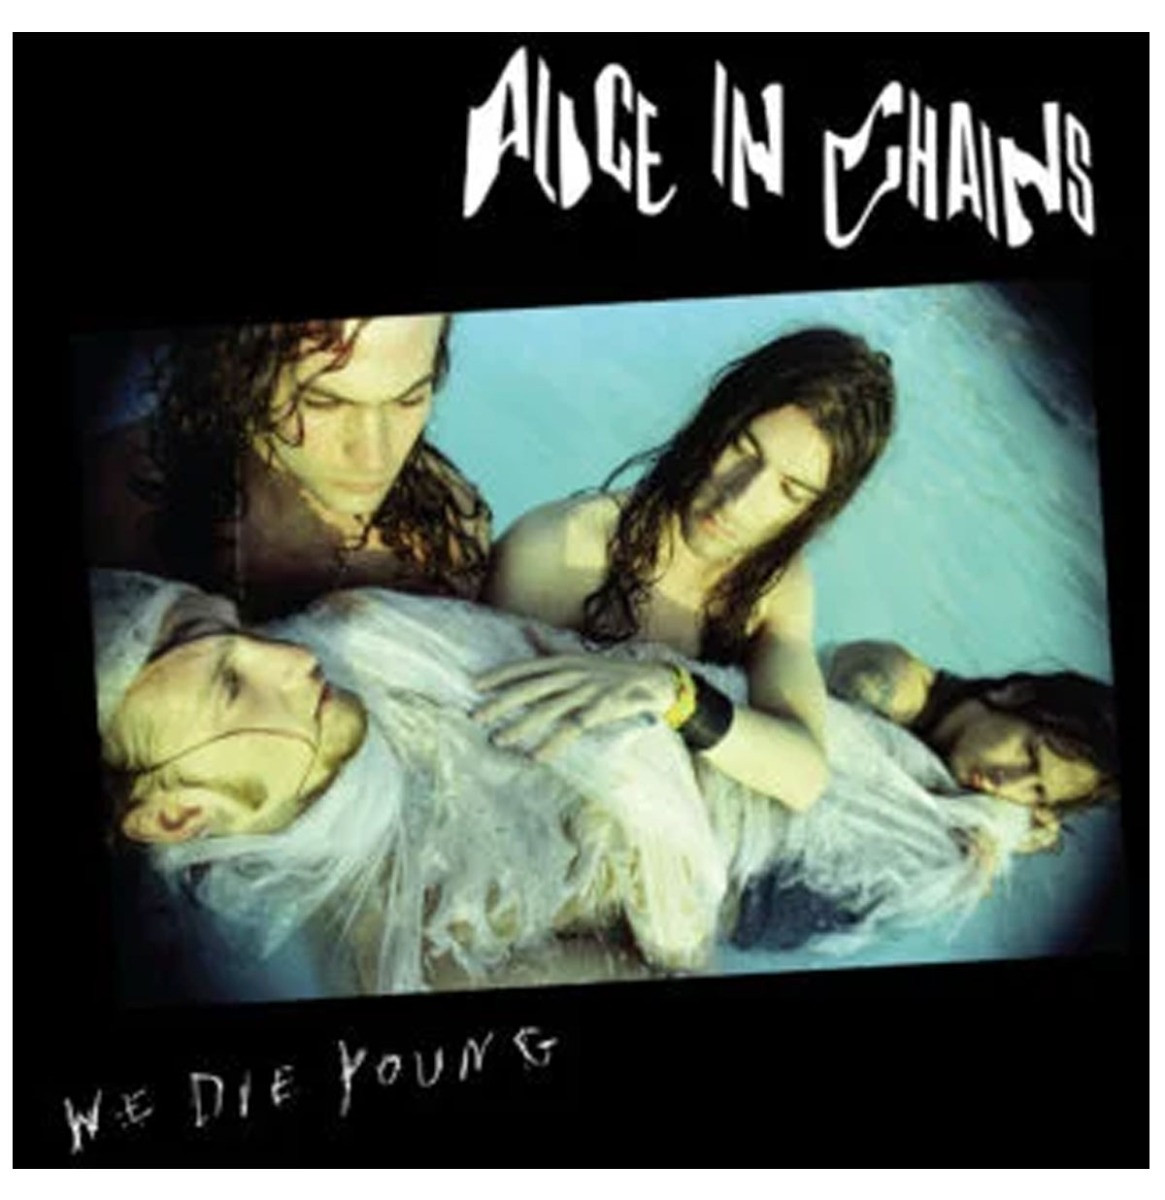 Alice In Chains - We Die Young LP (Record Store Day 2022)